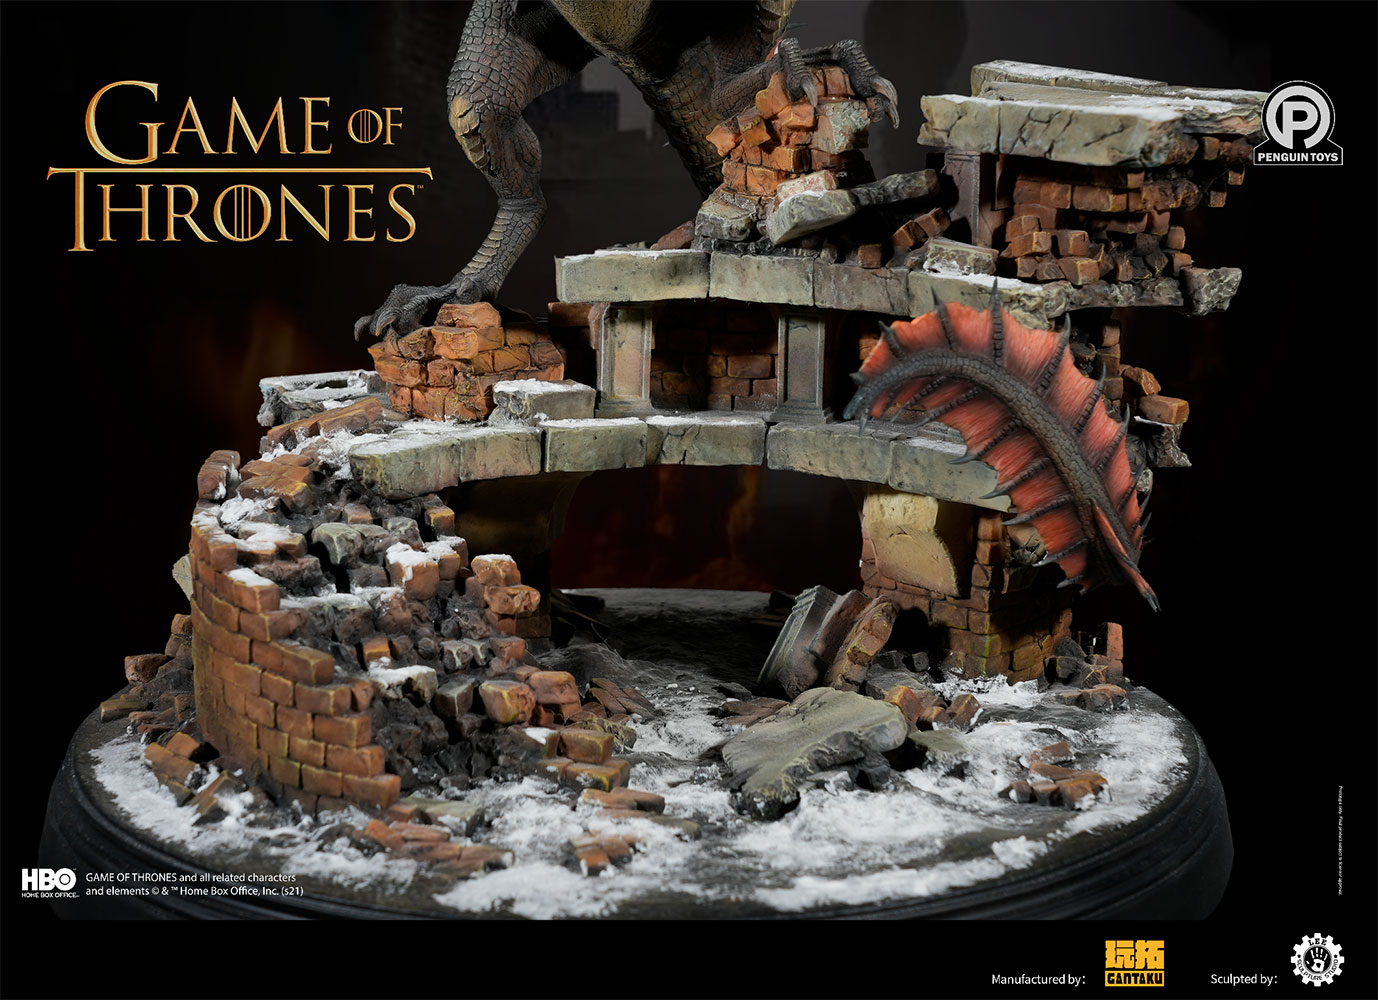 https://www.sideshow.com/storage/product-images/909064/drogon_game-of-thrones_gallery_6109e23e73c11.jpg